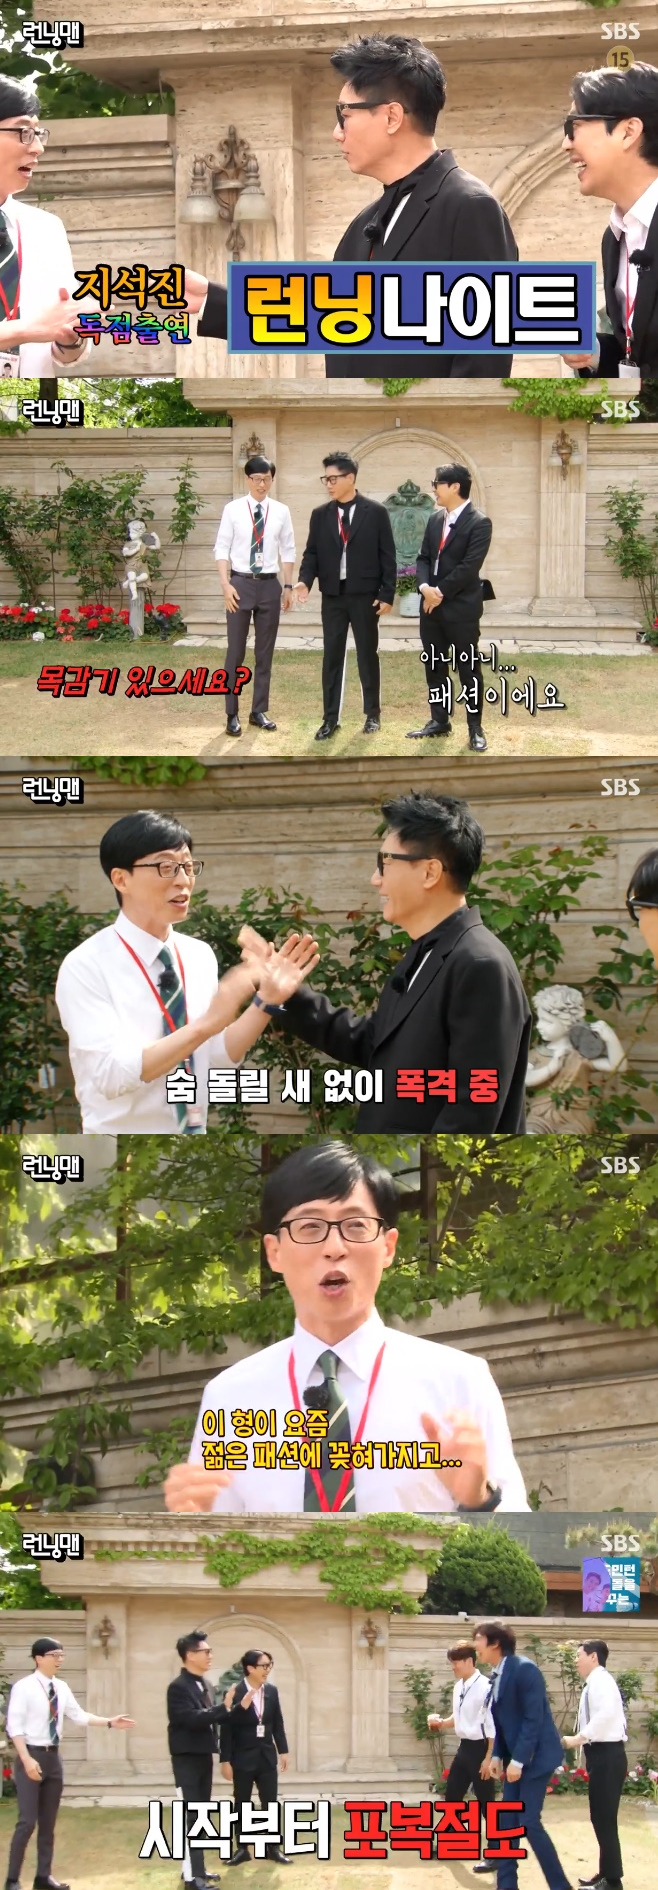 Yoo Jae-Suk teased Ji Suk-jin on Running ManIn the SBS entertainment program Running Man broadcasted on the afternoon of the 23rd, the members appeared in front of the camera with the concept of the worker.On that day, Yoo Jae-Suk poured out various comments as soon as he appeared, embarrassing Ji Suk-jin; pointing out his Fashion.Yoo Jae-Suk told Ji Suk-jins spectacular Fashion: Is that an invitation singer; the invitation singer can go that way.We have a meeting today, but it seems a little gorgeous. Did you get water with rocks behind it? Yoo Jae-Suk said, This is the time to come back to your mind.This brother is stuck in a young fashion these days. He explained why he made fun of it. Kim Jong Kook, Lee Kwang Soo and Yang Se Chan also pointed out Ji Suk-jins Fashion.